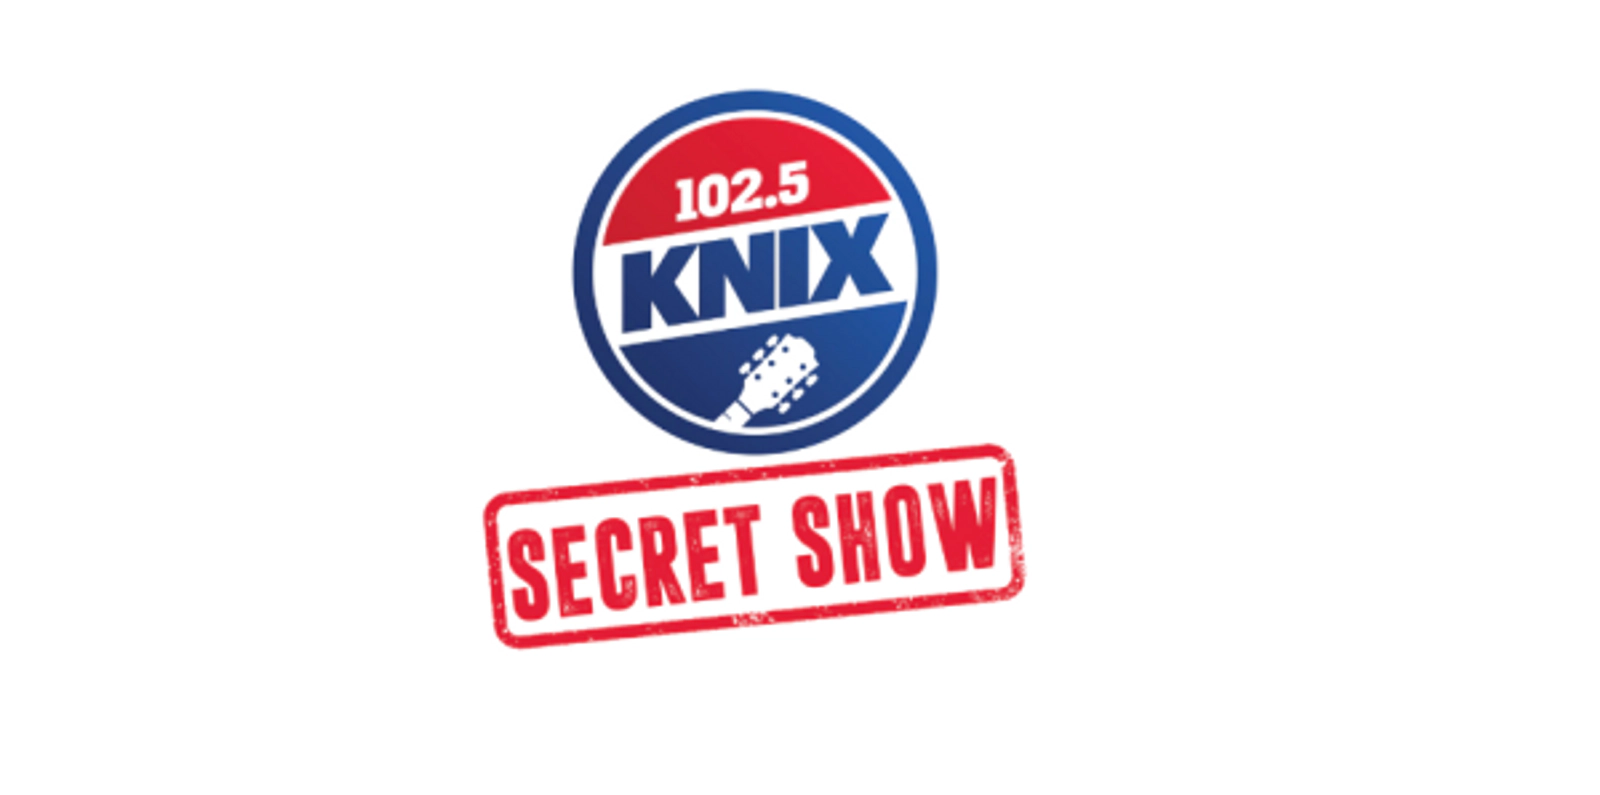 KNIX Country 102.5 - The KNIX $10,000 Call Back has returned! What